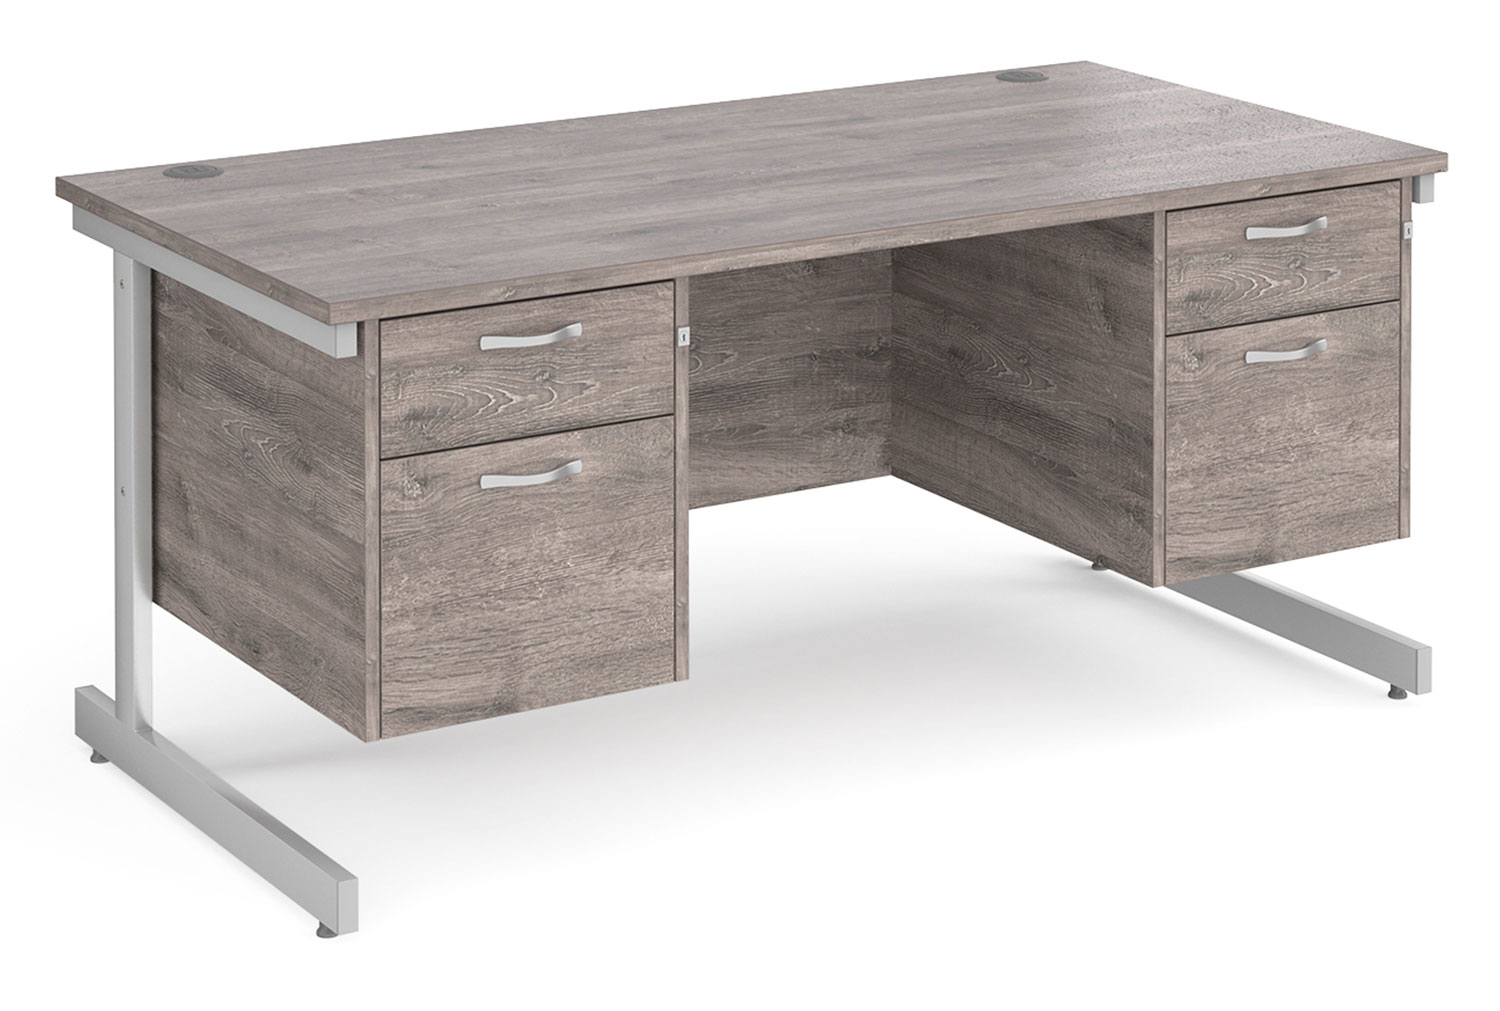 Thrifty Next-Day Rectangular Office Desk 2+2 Drawers, 160wx80dx73h (cm), Grey Oak, Express Delivery